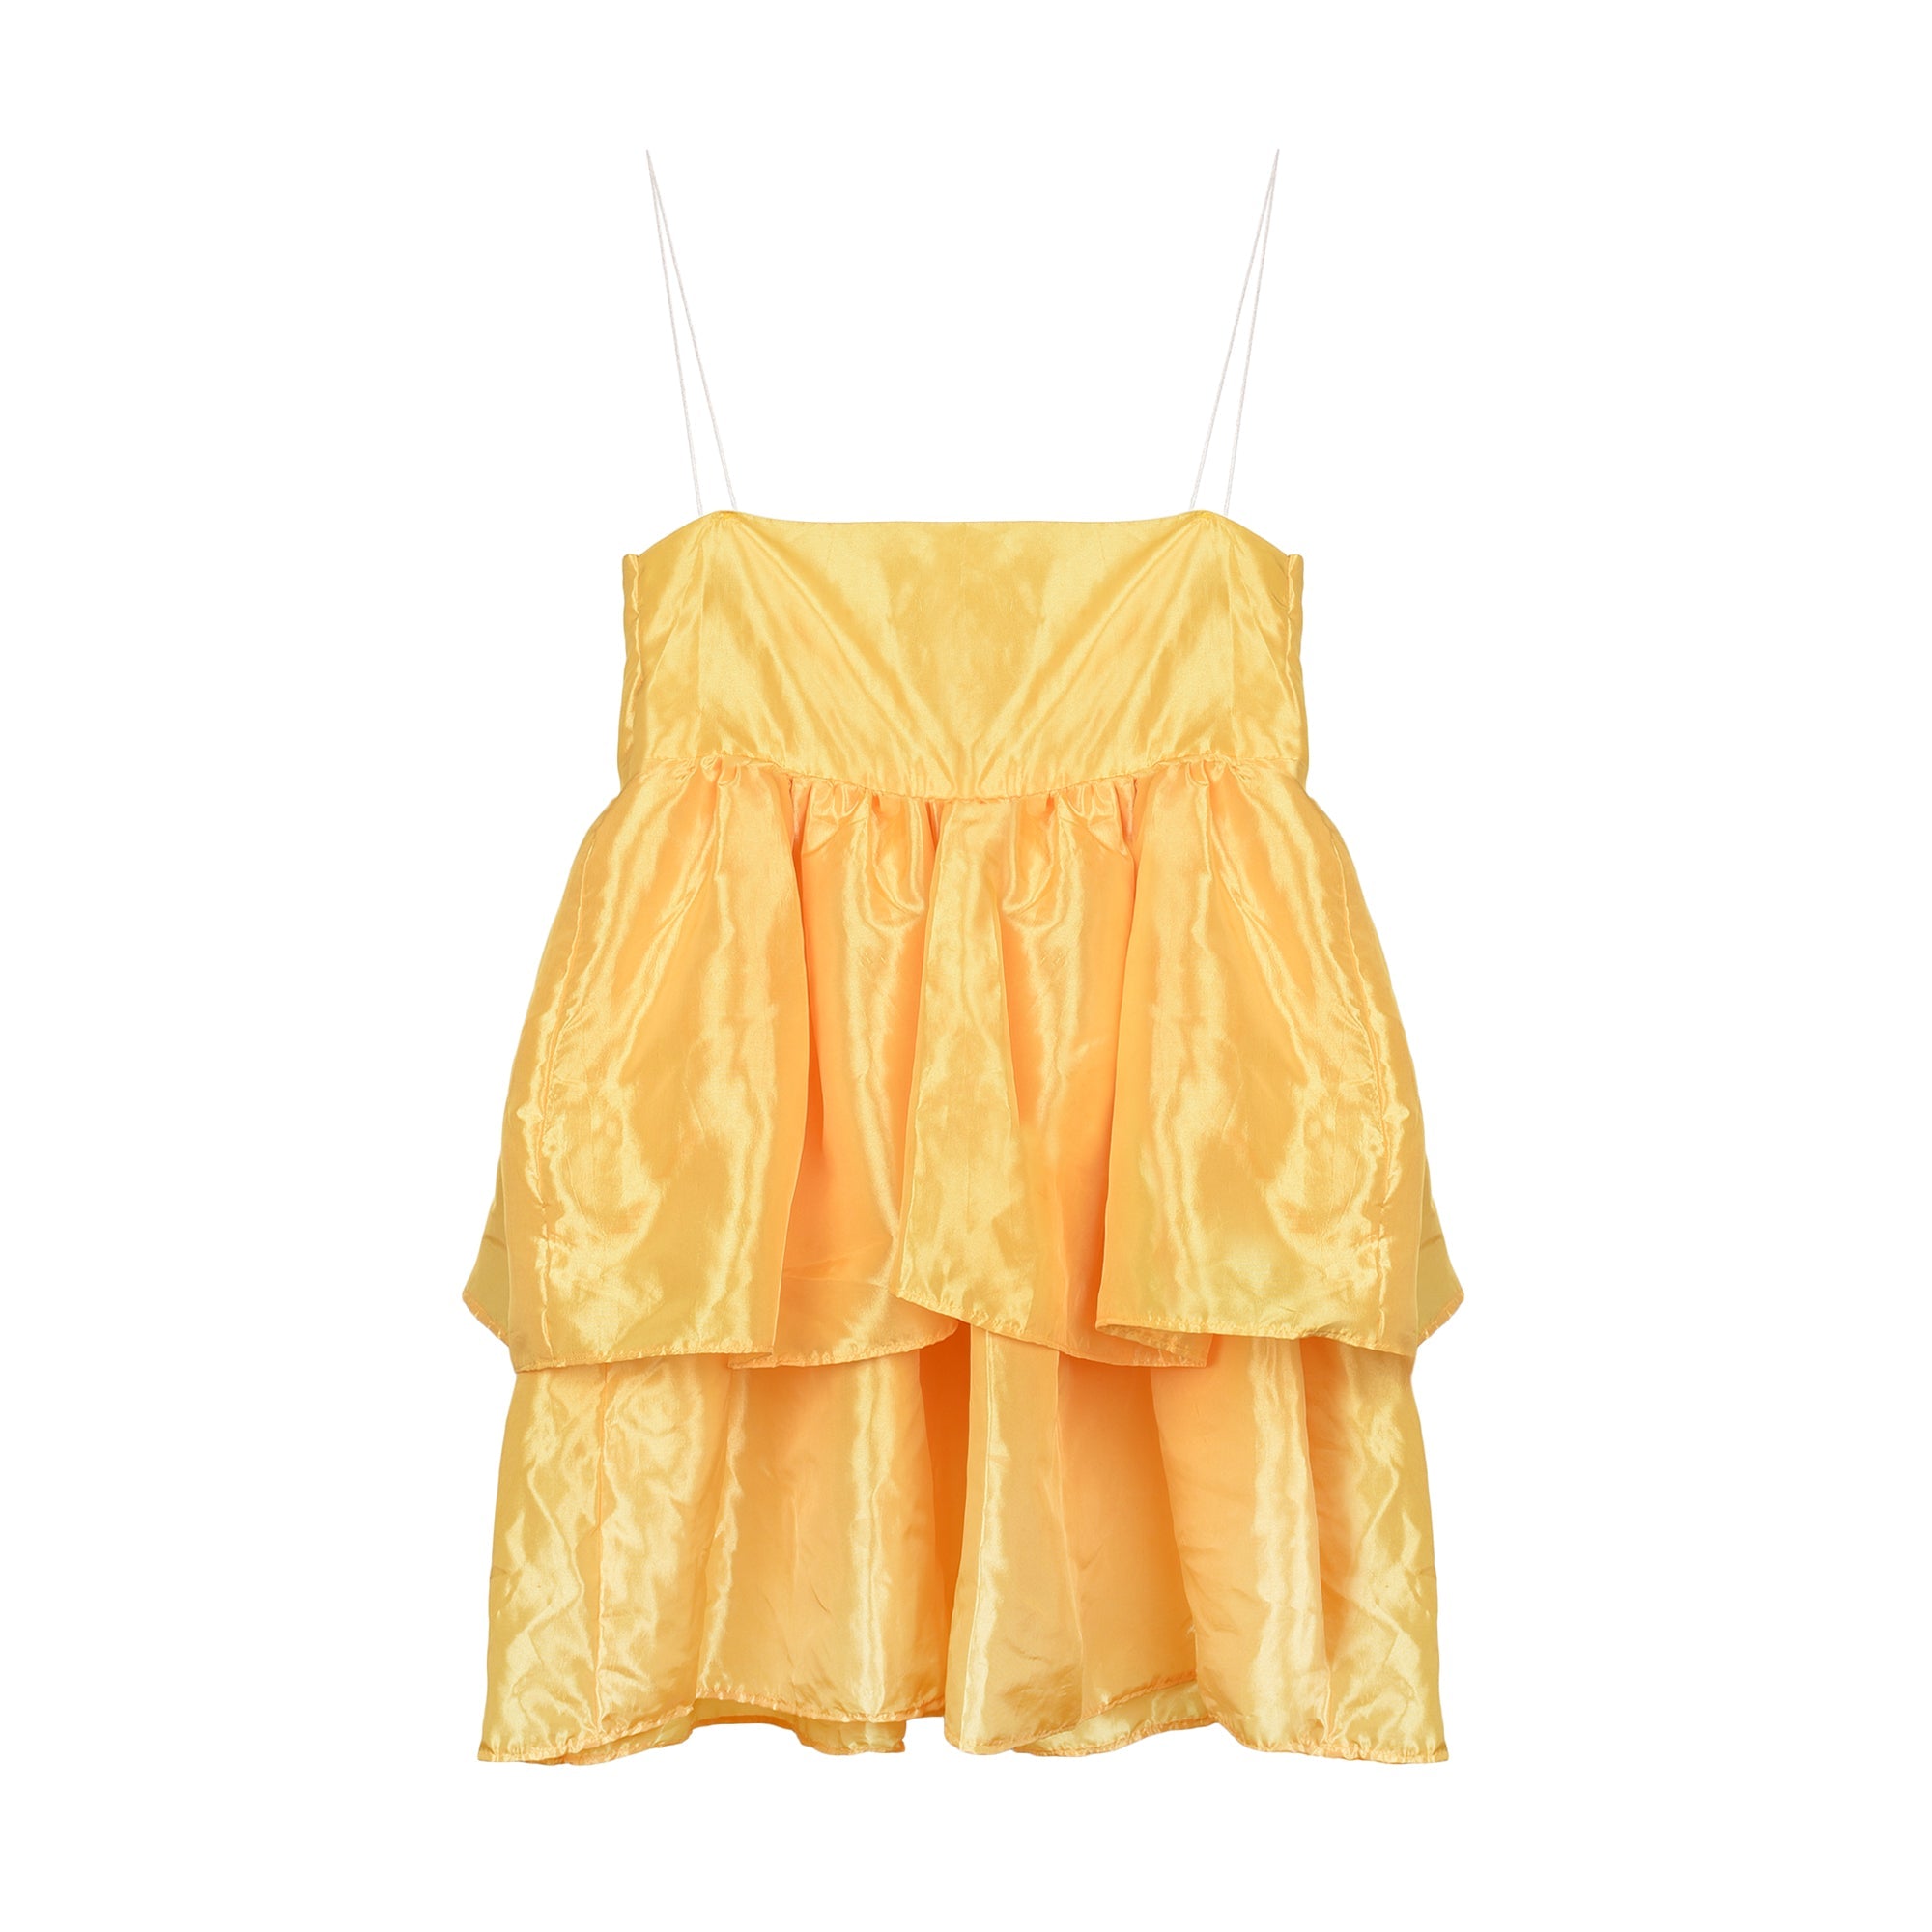 Birthday Suit Yellow with Silk Chord Straps by Madeline Marie